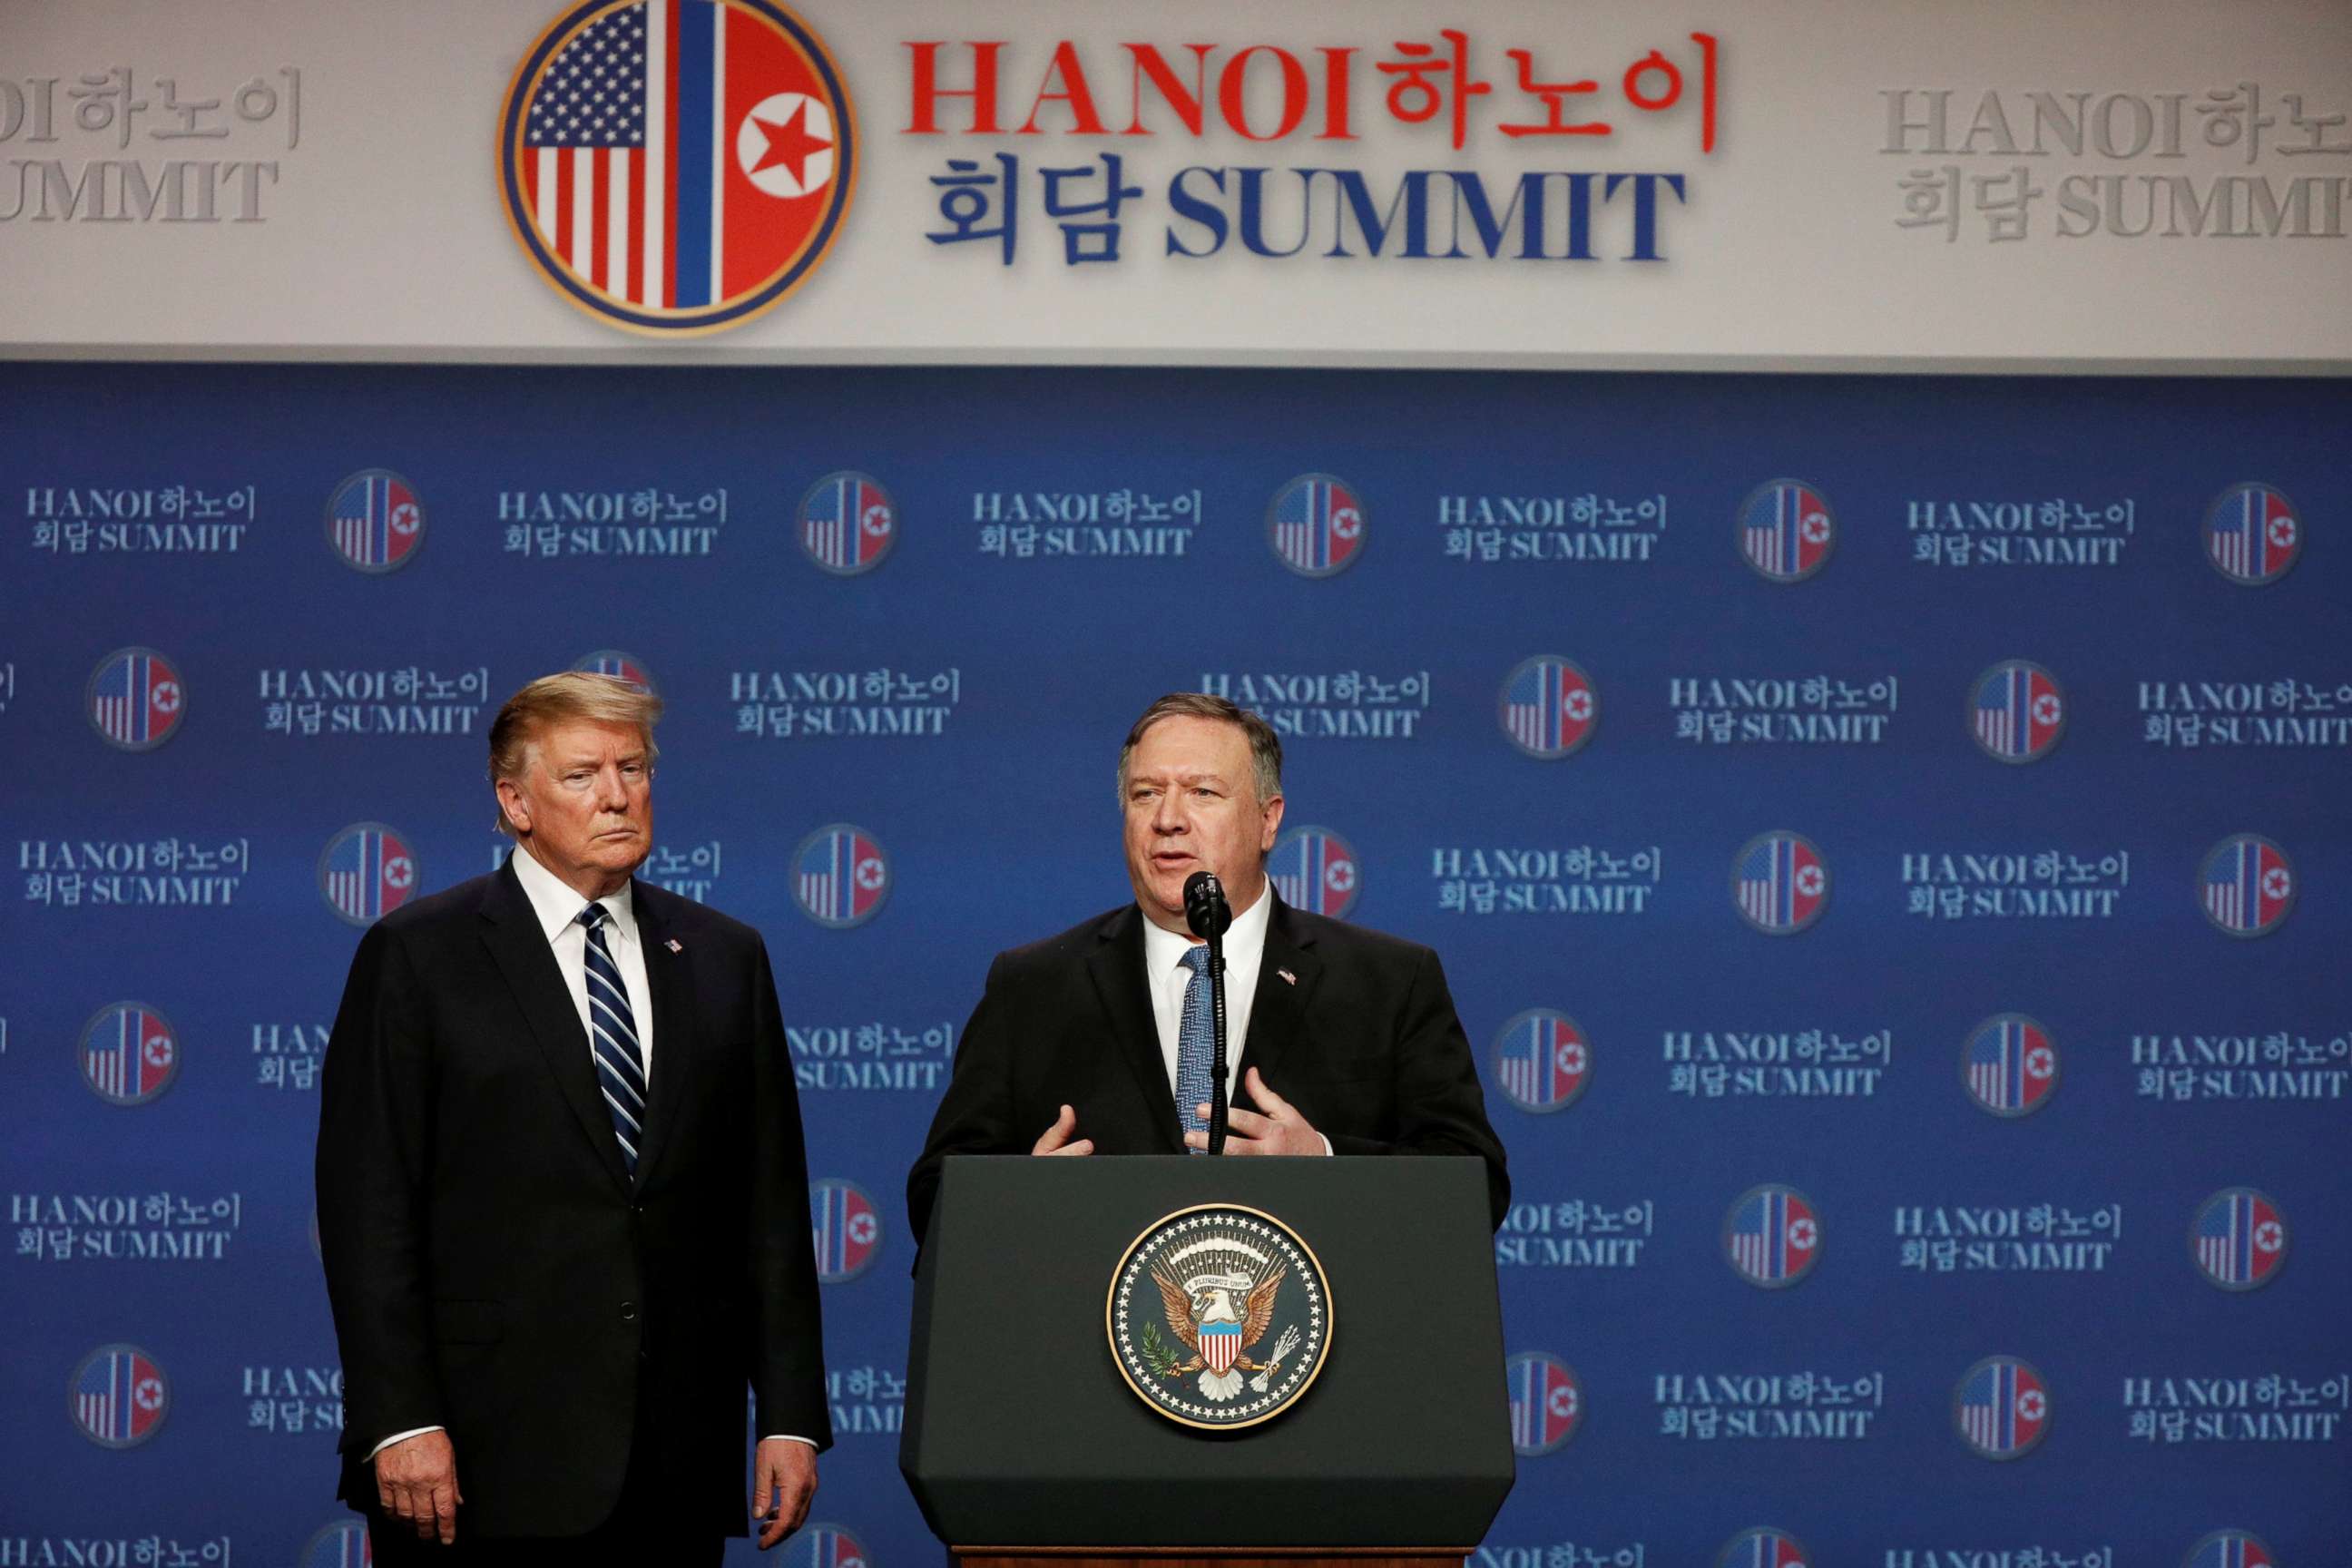 PHOTO: Secretary of State Mike Pompeo speaks next to President Donald Trump during a news conference after Trump's summit with North Korean leader Kim Jong Un, at the JW Marriott Hotel in Hanoi, Vietnam, Feb. 28, 2019.